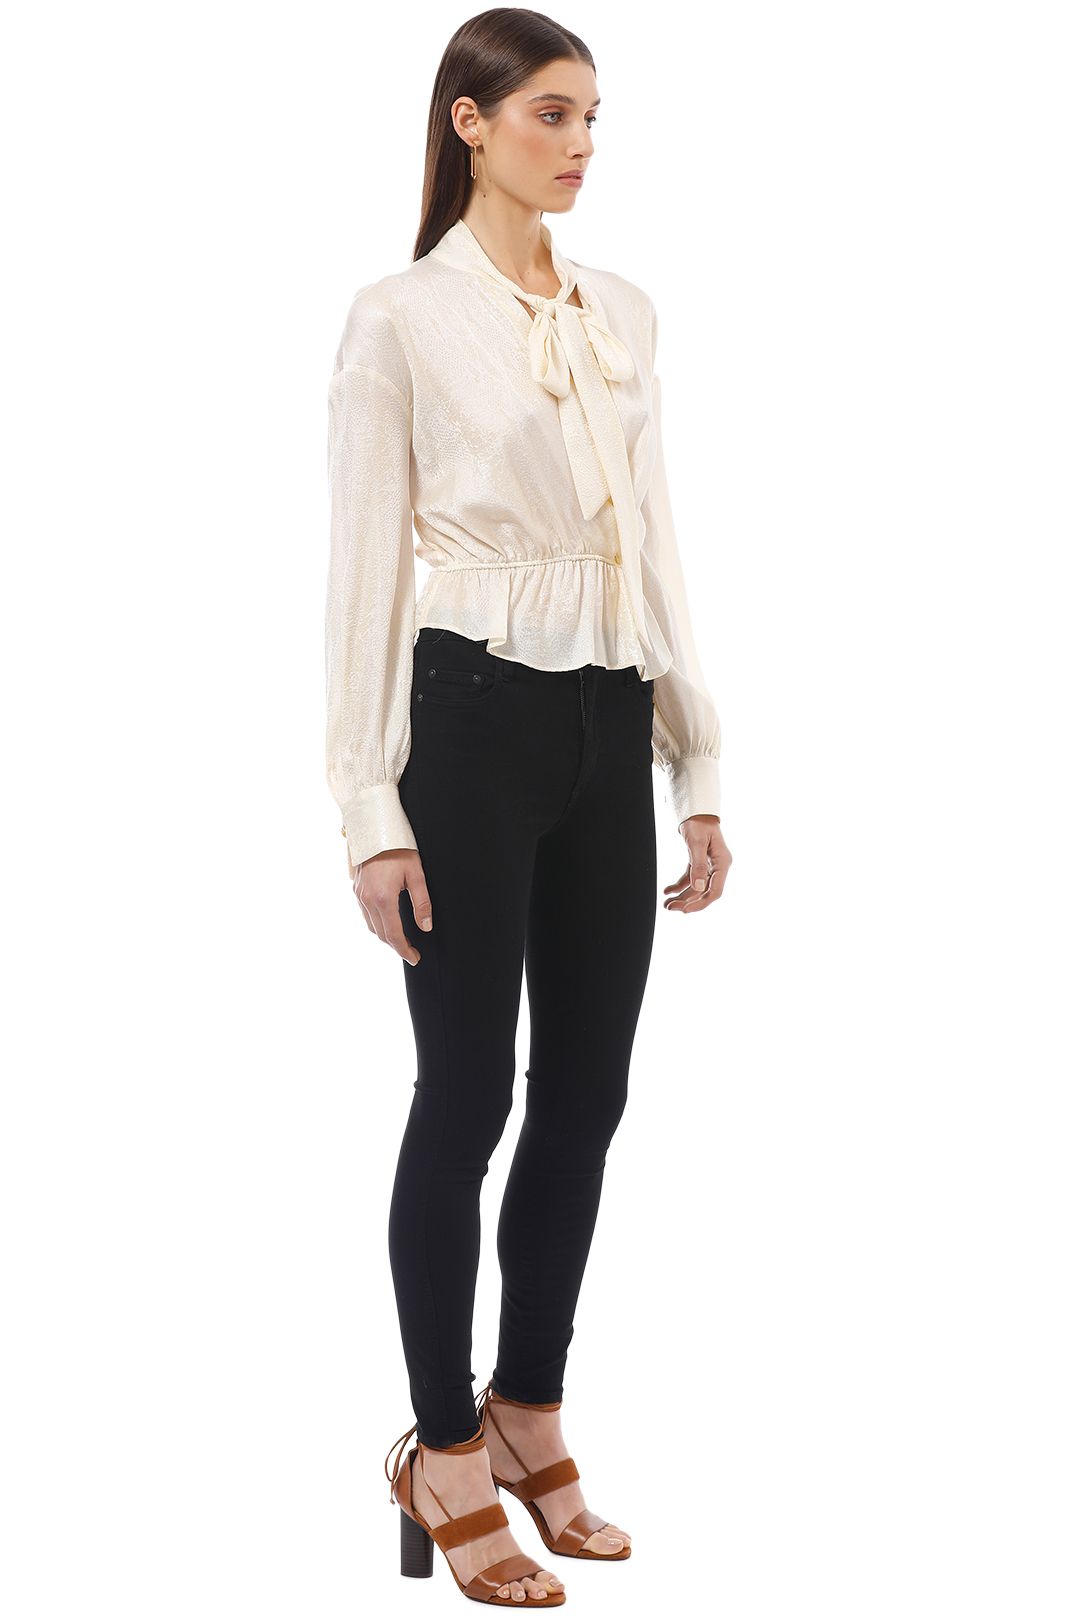 Manning Cartell - Up Scale Blouse - Cream - Side